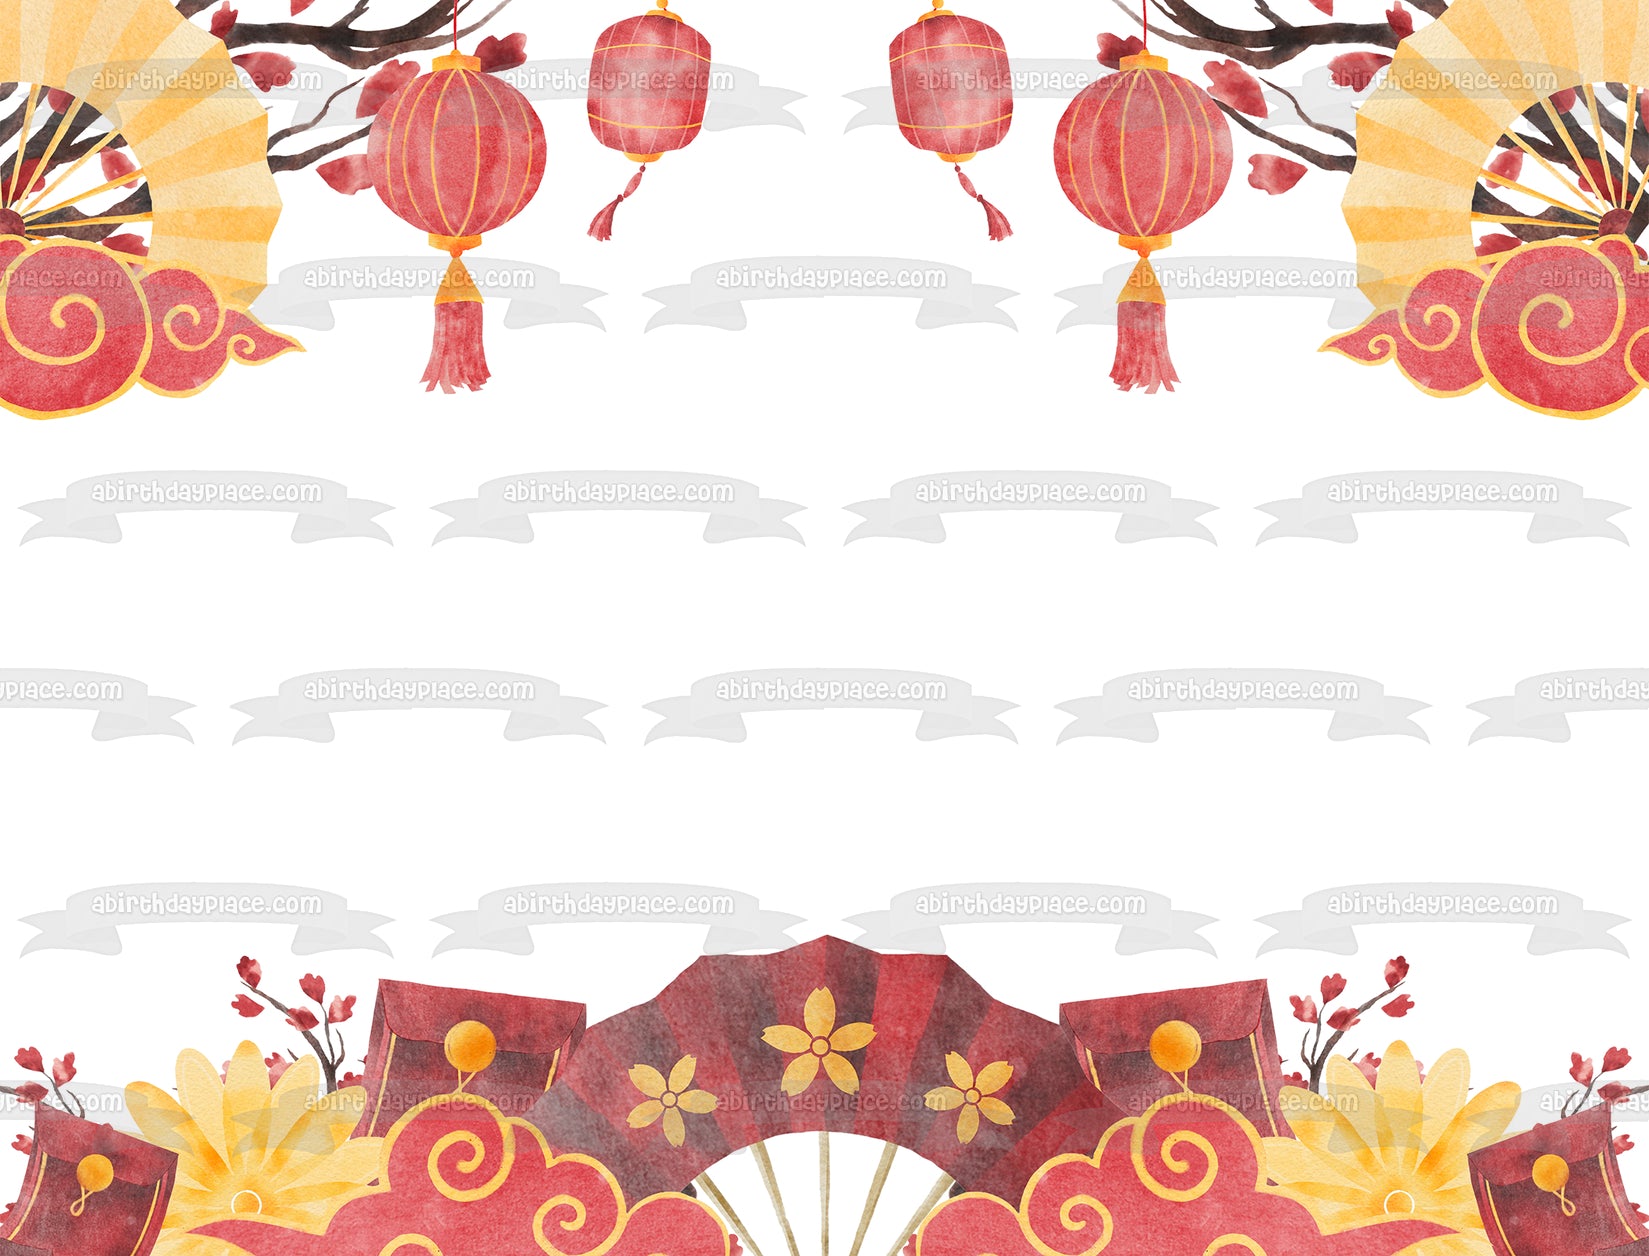 Chinese New Year Fans and Lanterns Edible Cake Topper Image ABPID57771